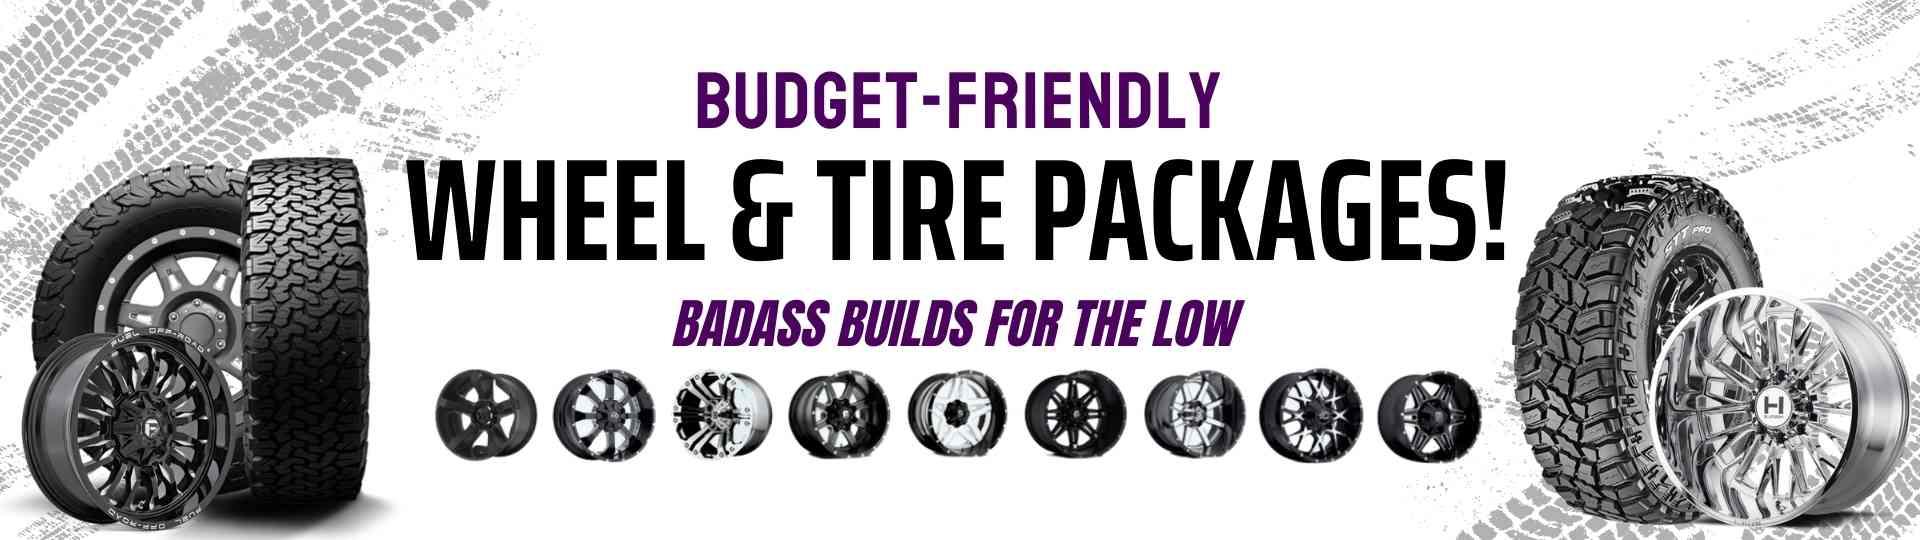 wheel and tire package banner